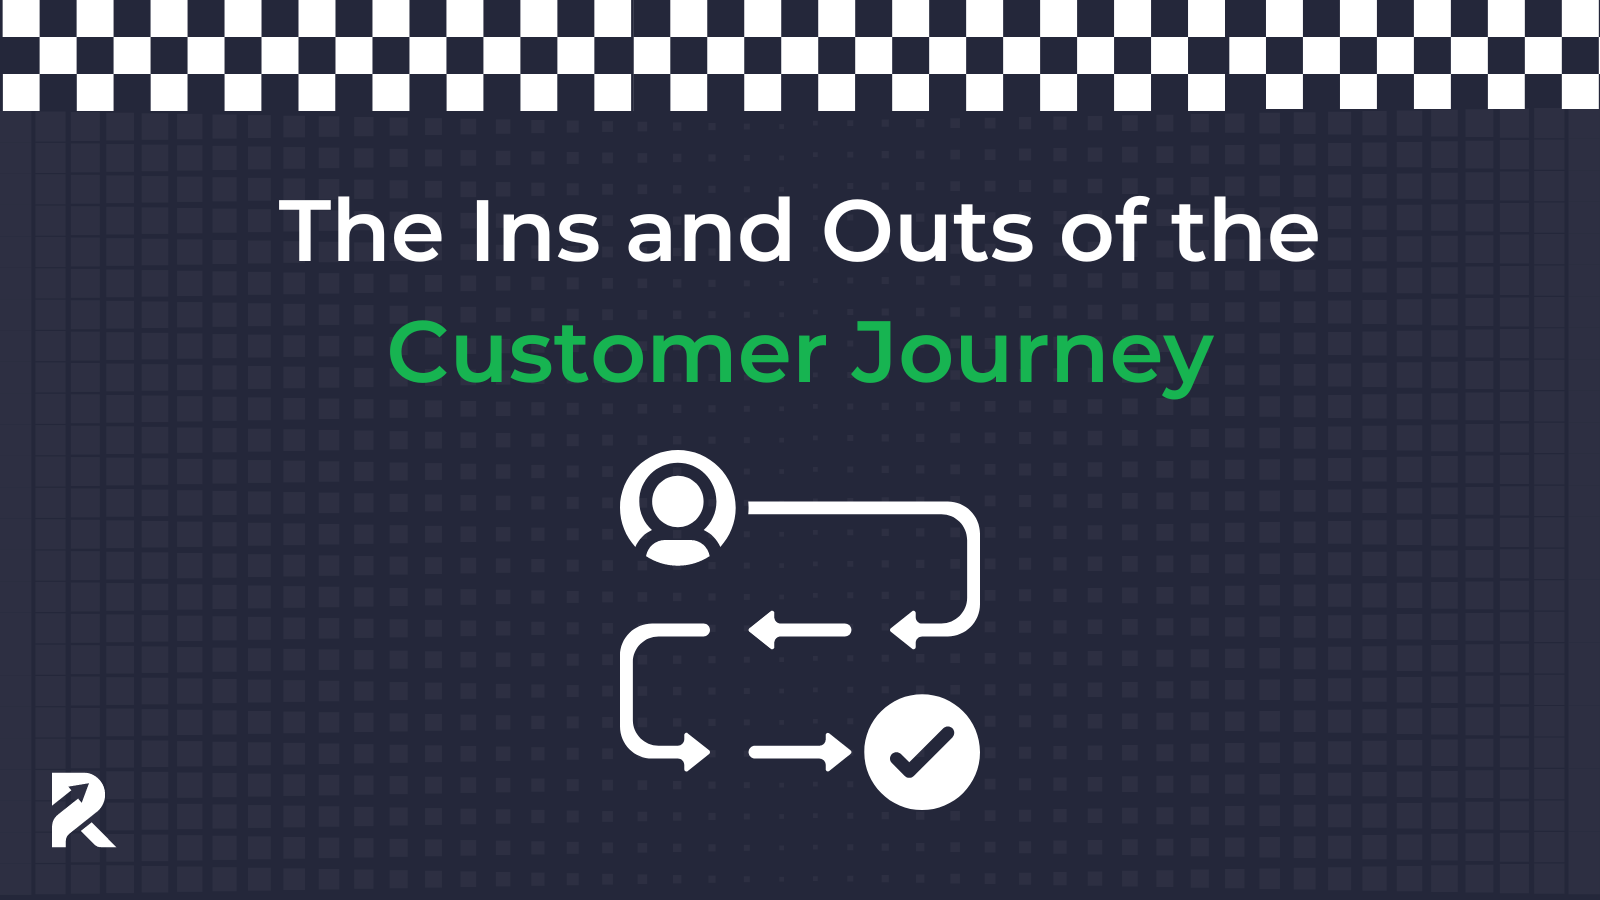 The Ins and Outs of the Customer Journey